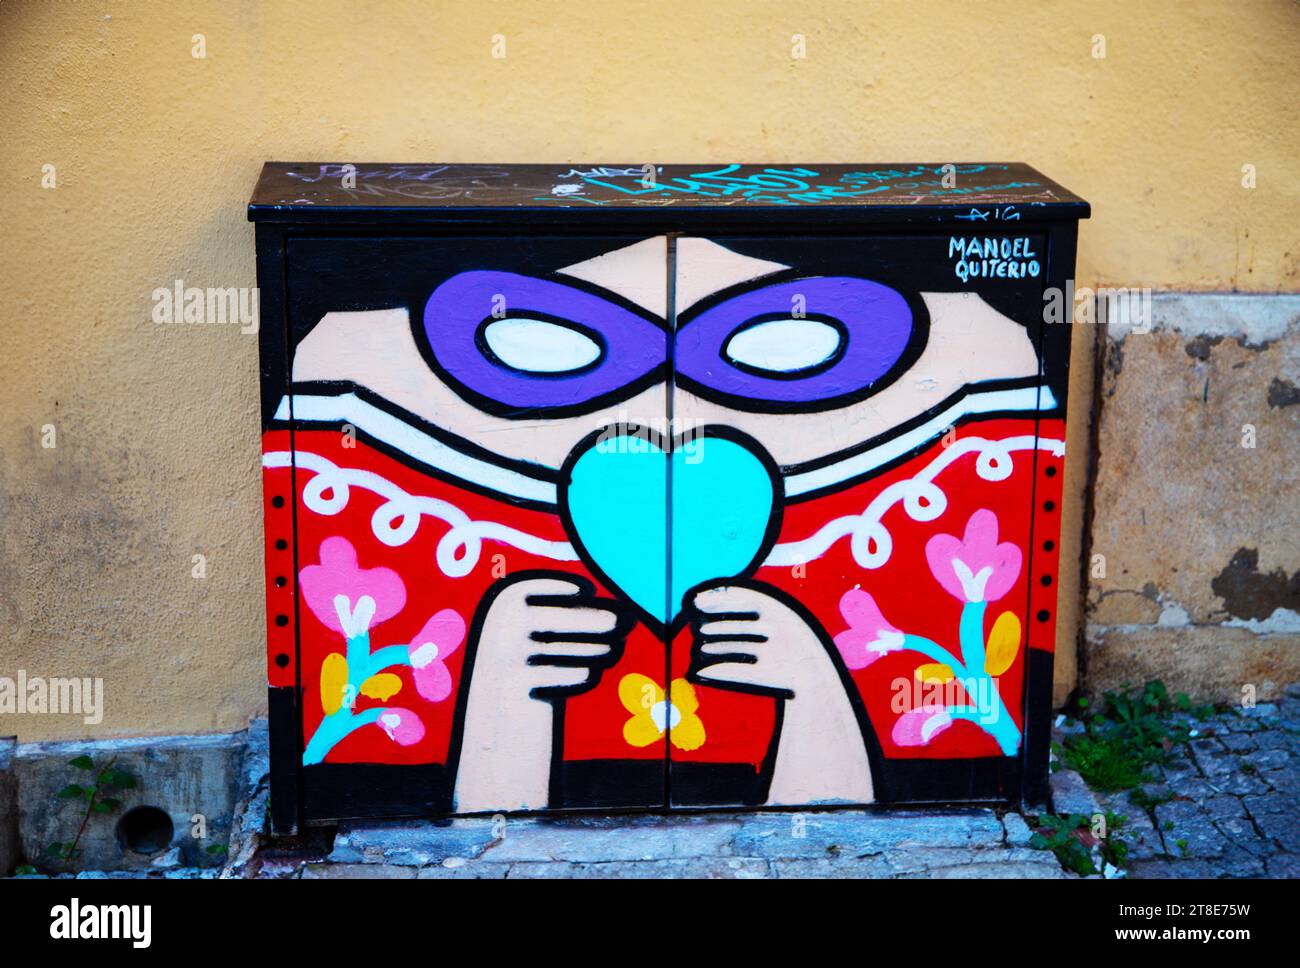 Vividly painted electrical junction box brightens Lisbon's streets, adding a pop of color amidst its charming urban landscape Stock Photo